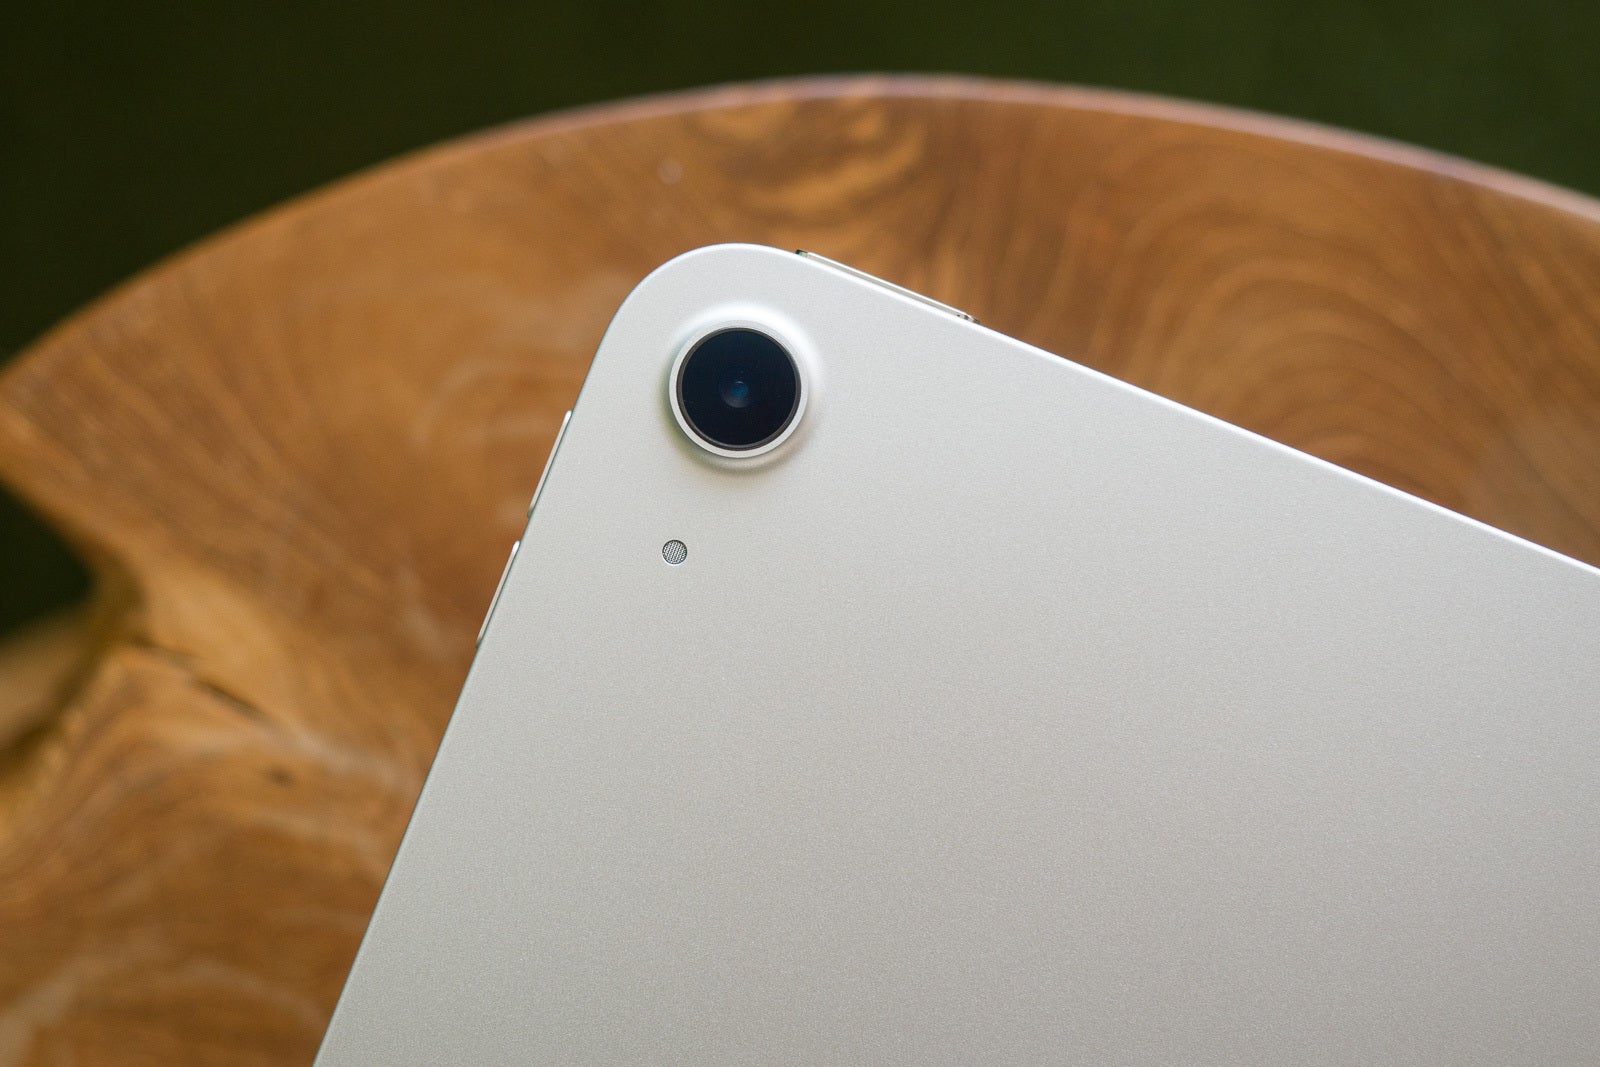 The iPad Air's single main camera, next to which is a microphone - Apple iPad Air (2020) Review